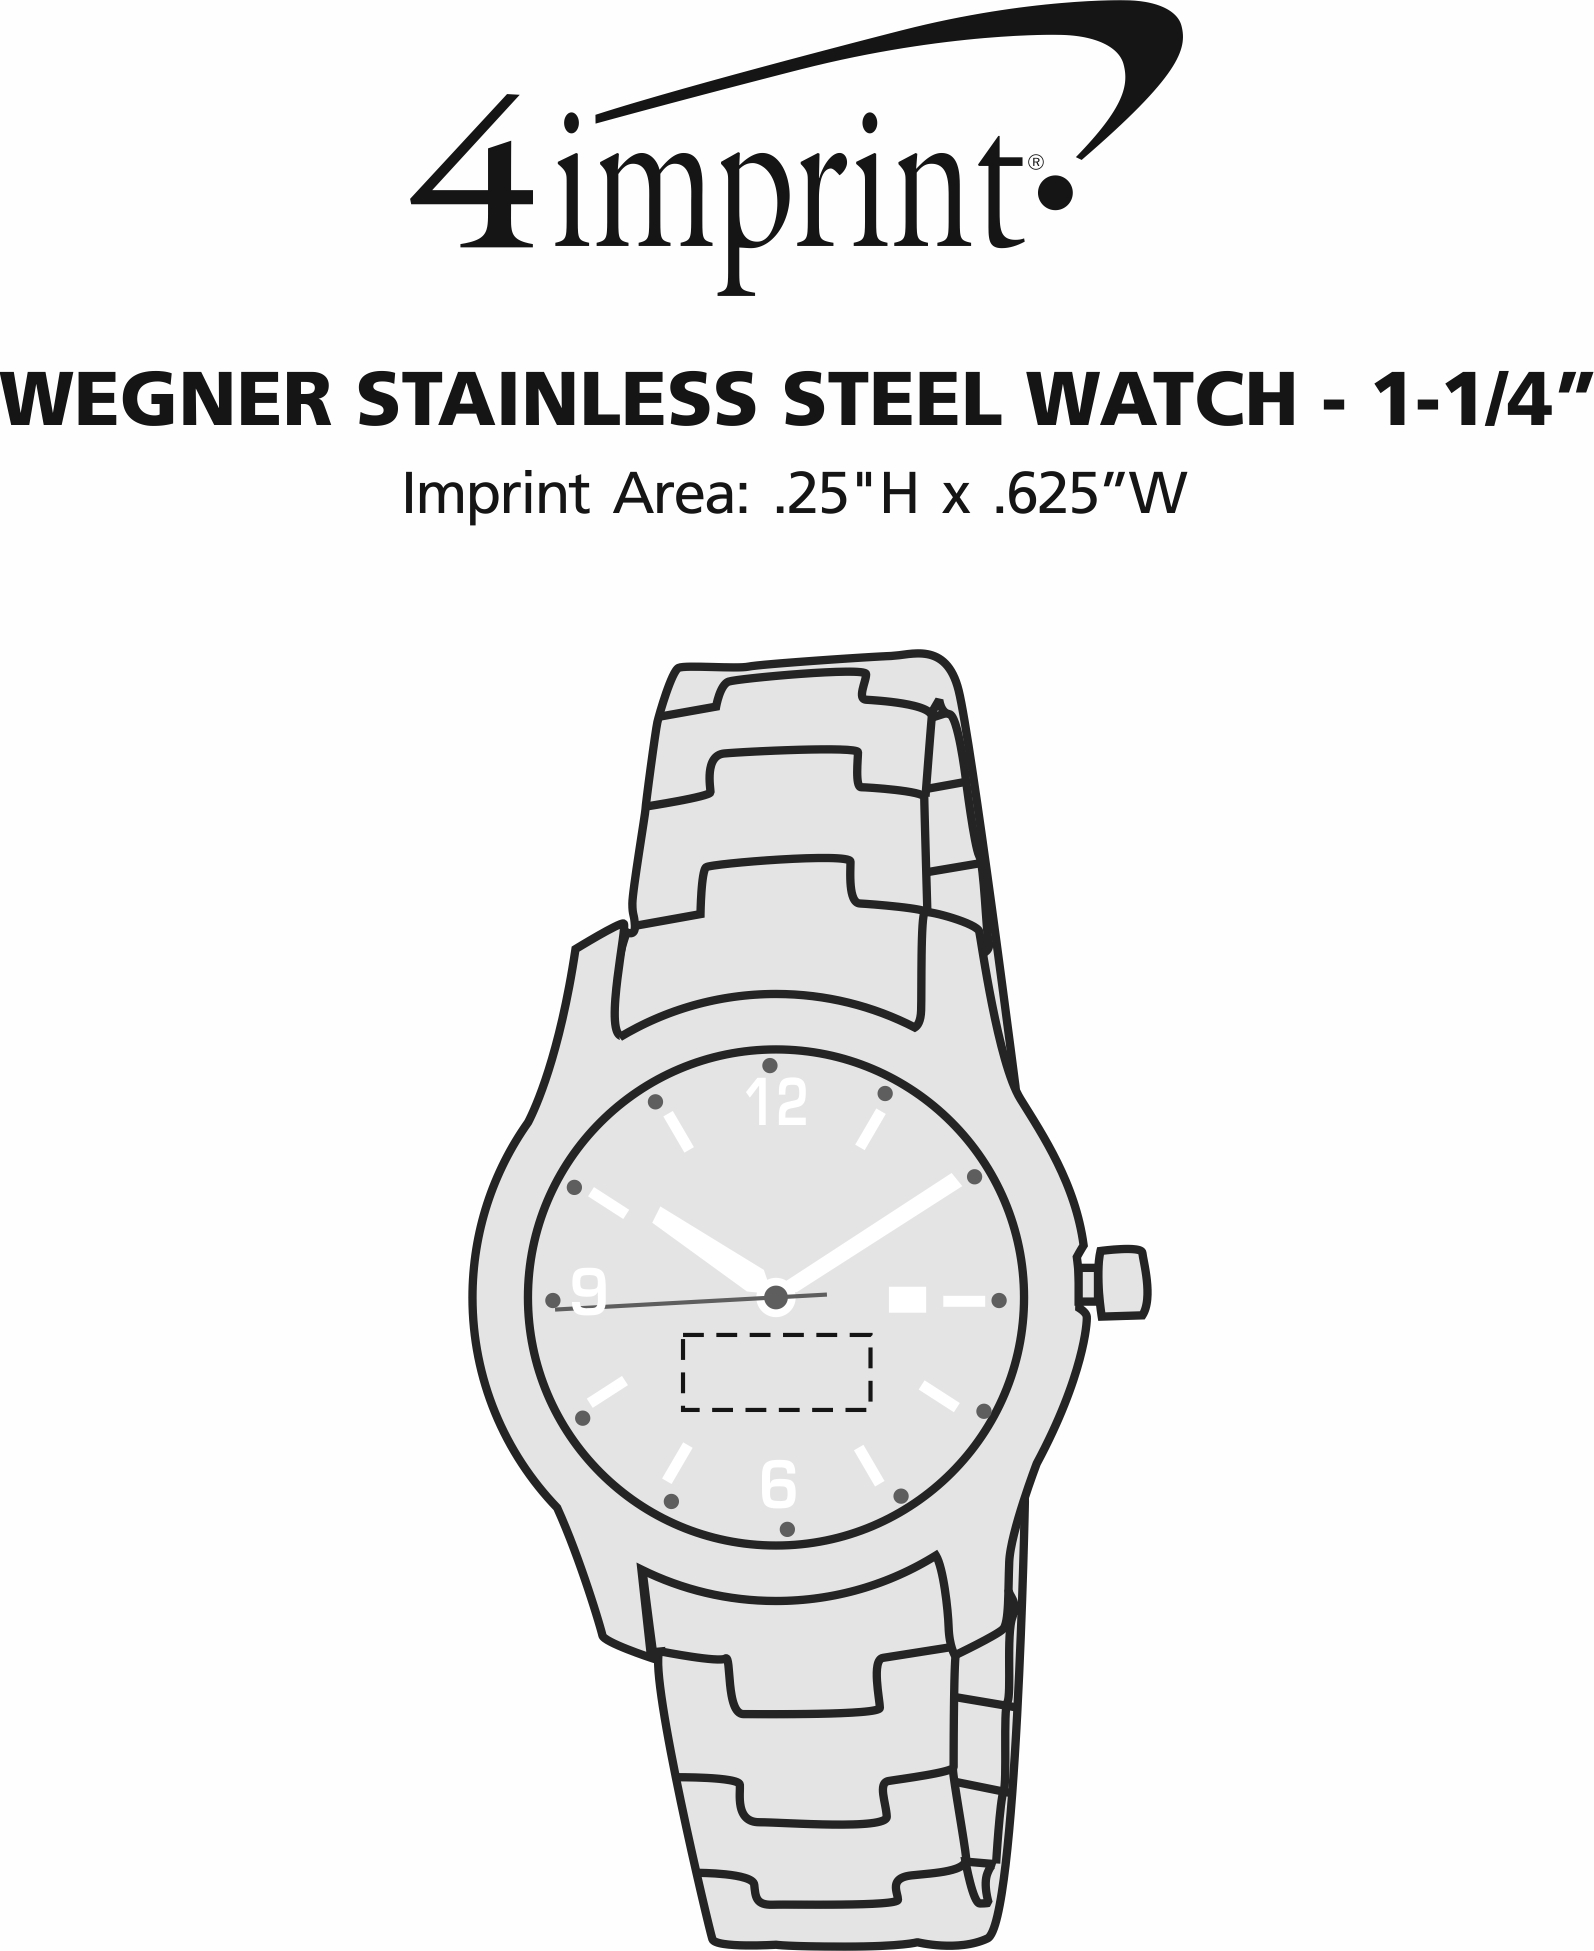 Imprint Area of Wenger Stainless Steel Watch - 1-1/4"